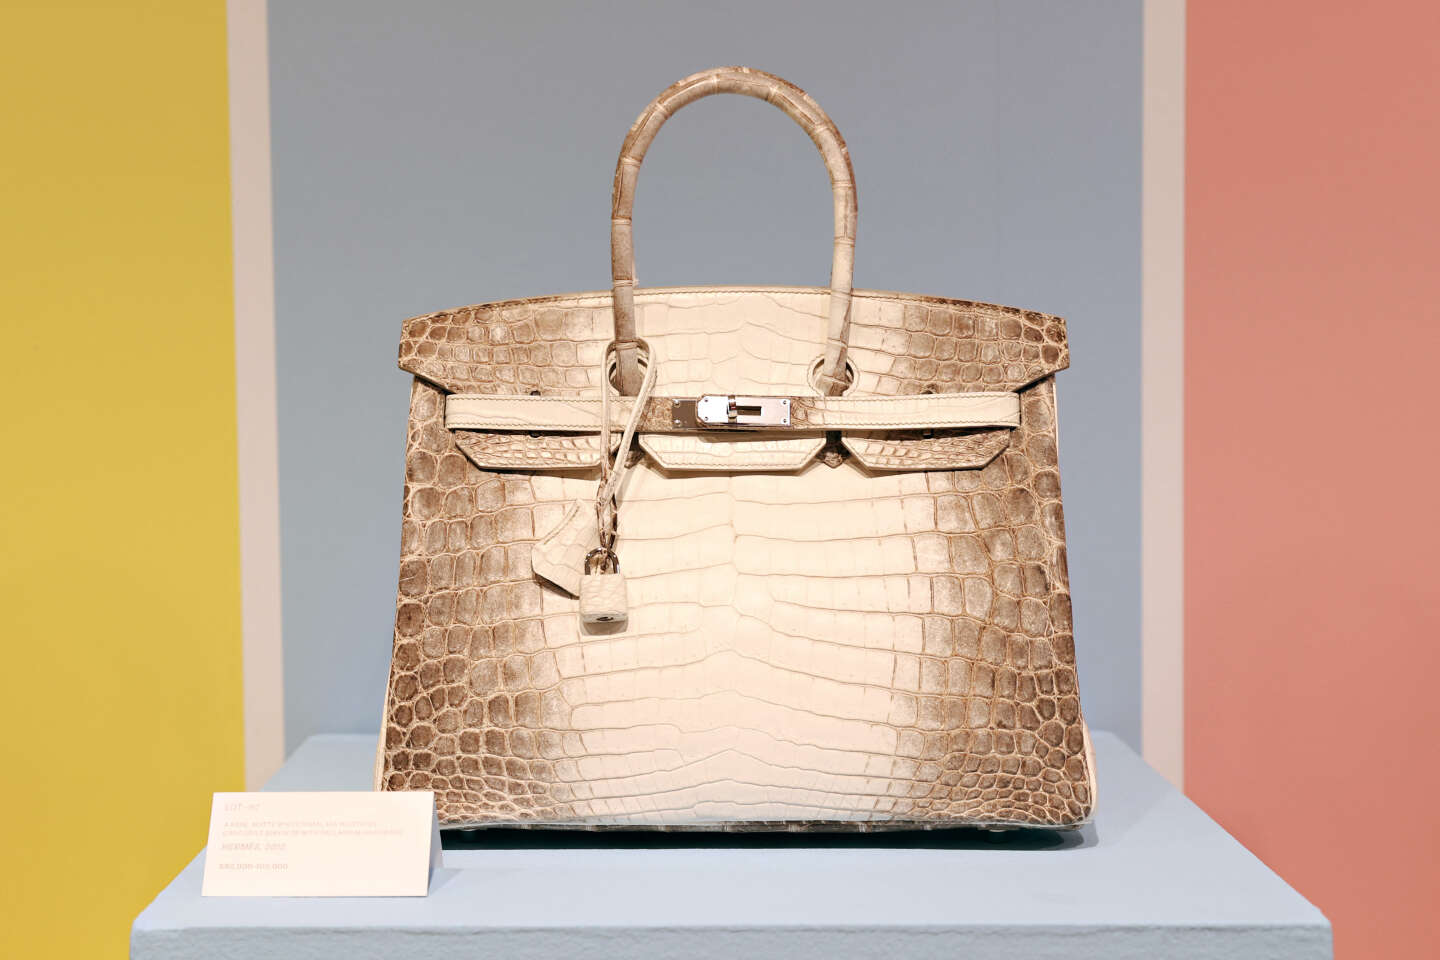 Hermès Birkin Bag Review 2021 - is it REALLY worth the $10,000